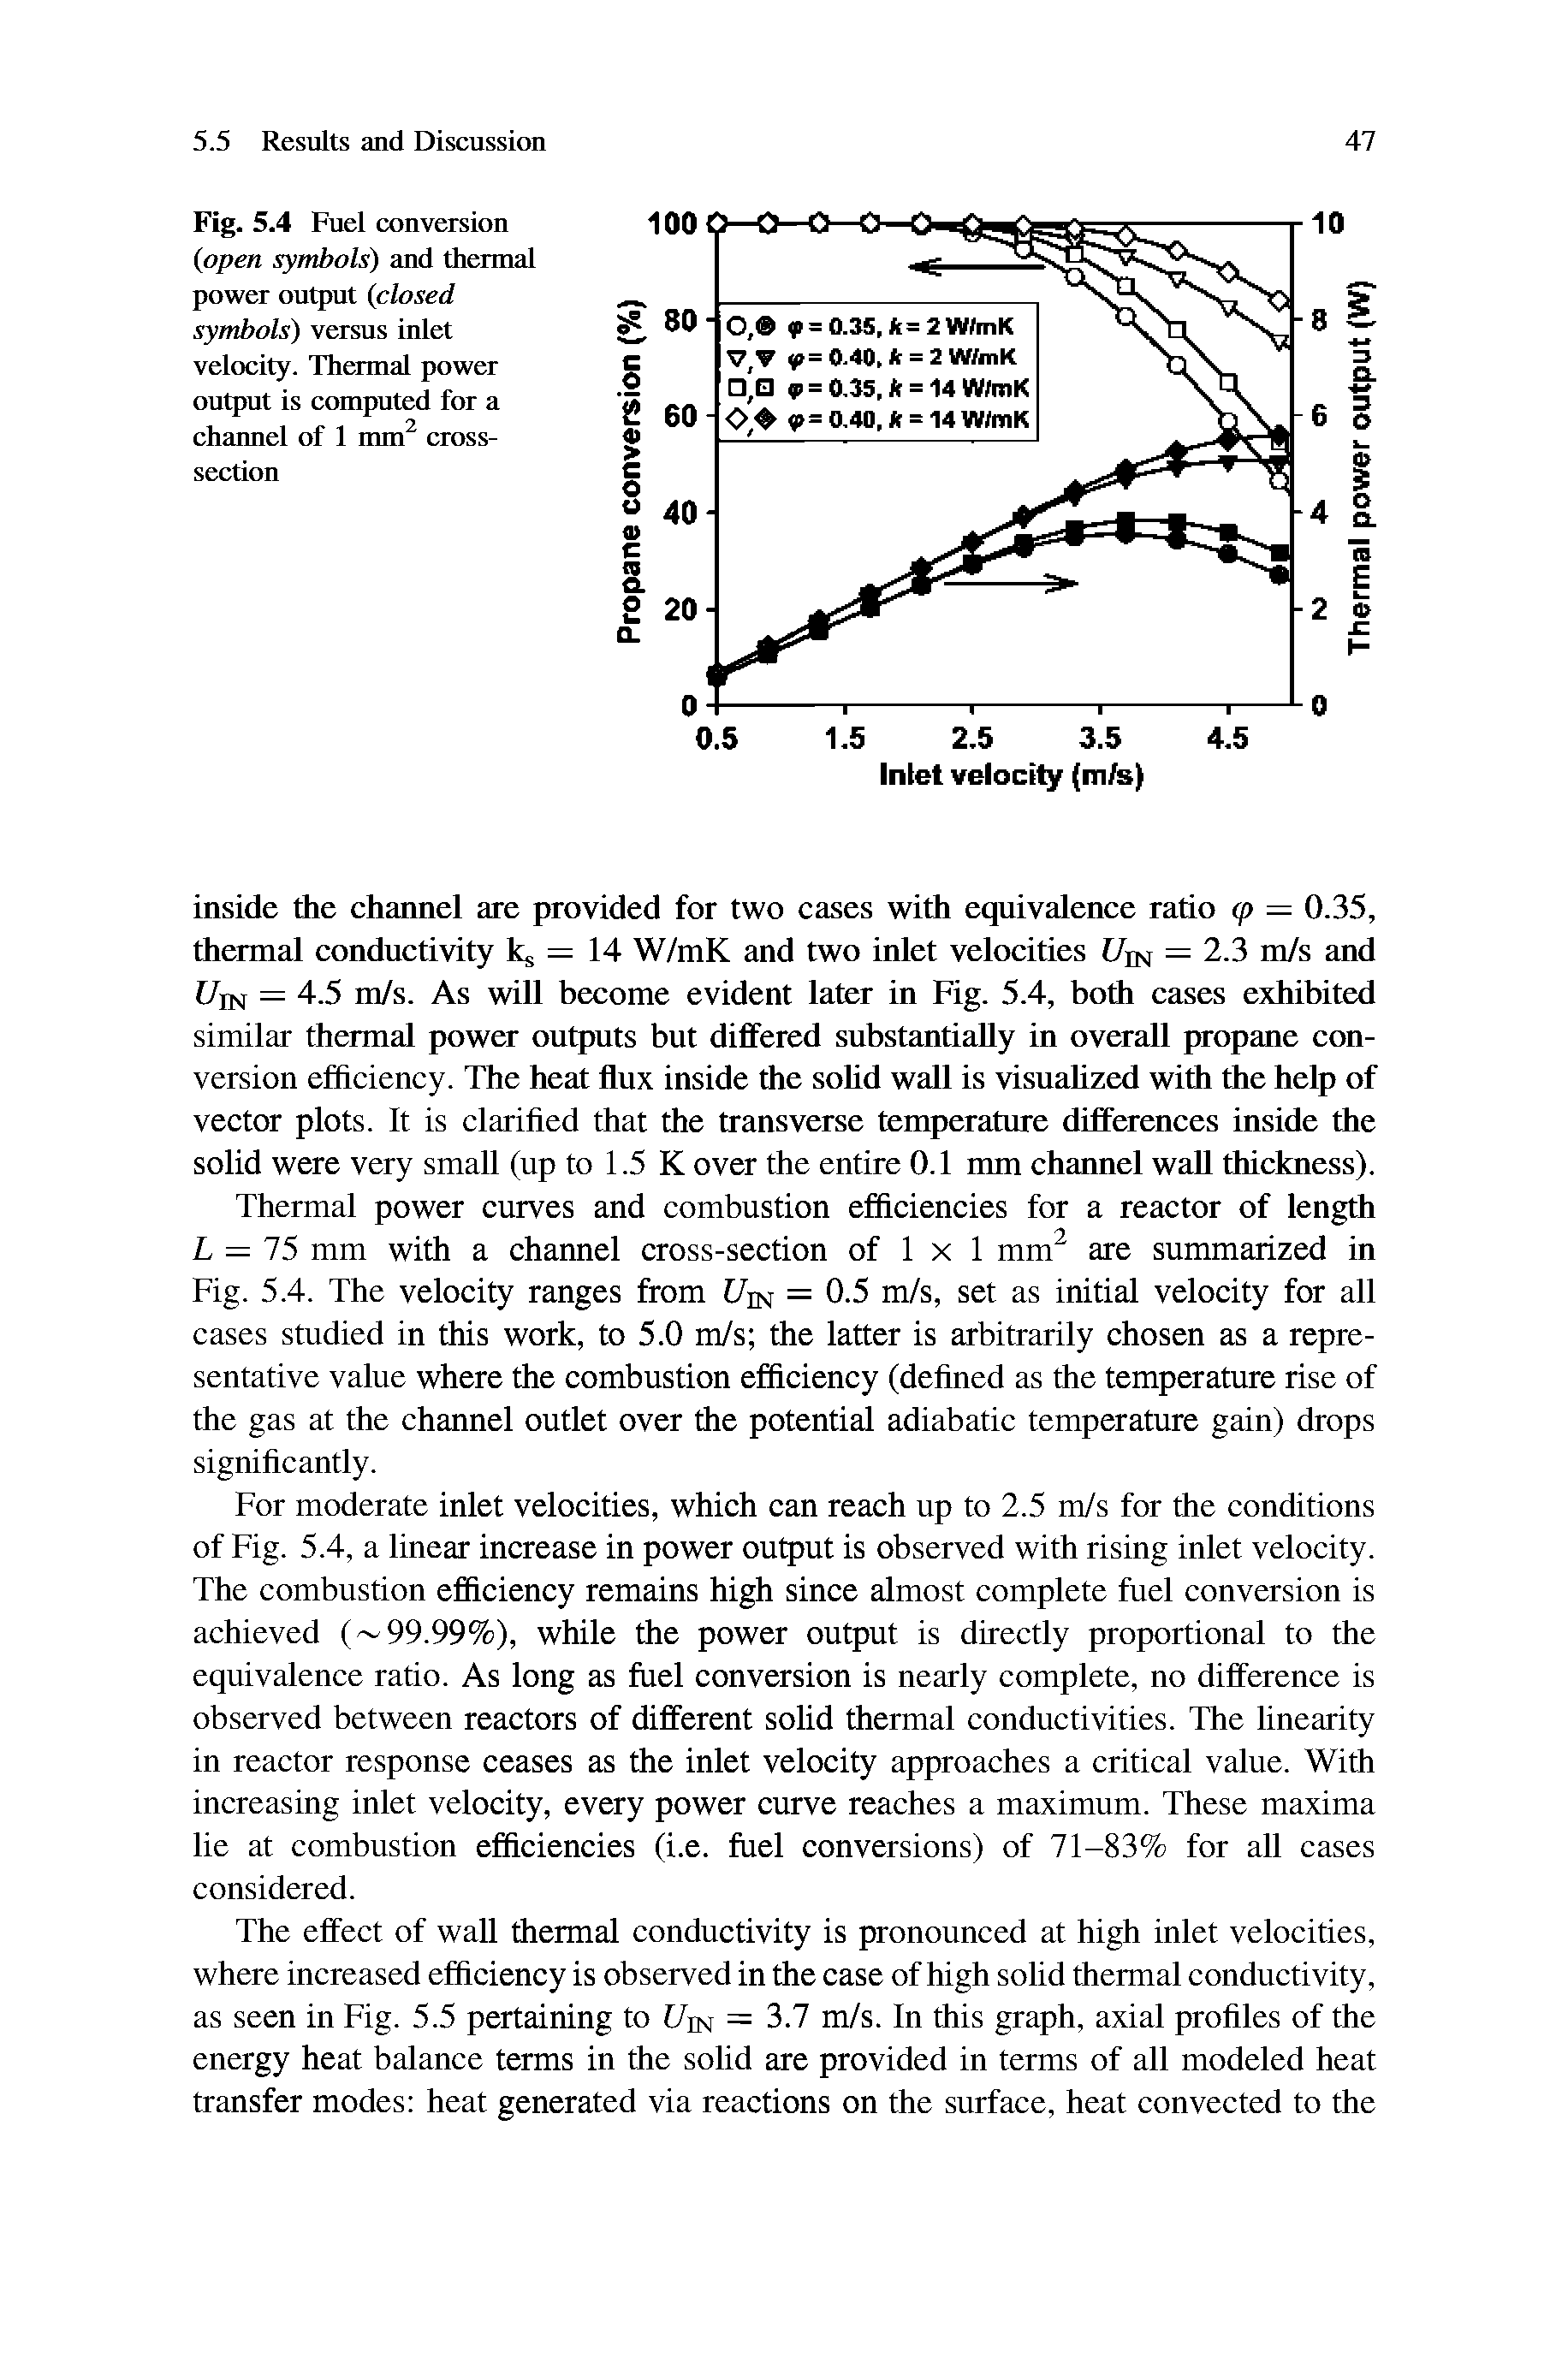 Fig. 5.4 Fuel conversion (open symbols) and thermal power output (closed symbols) versus inlet velocity. Thermal power output is computed for a channel of 1 mm cross-section...